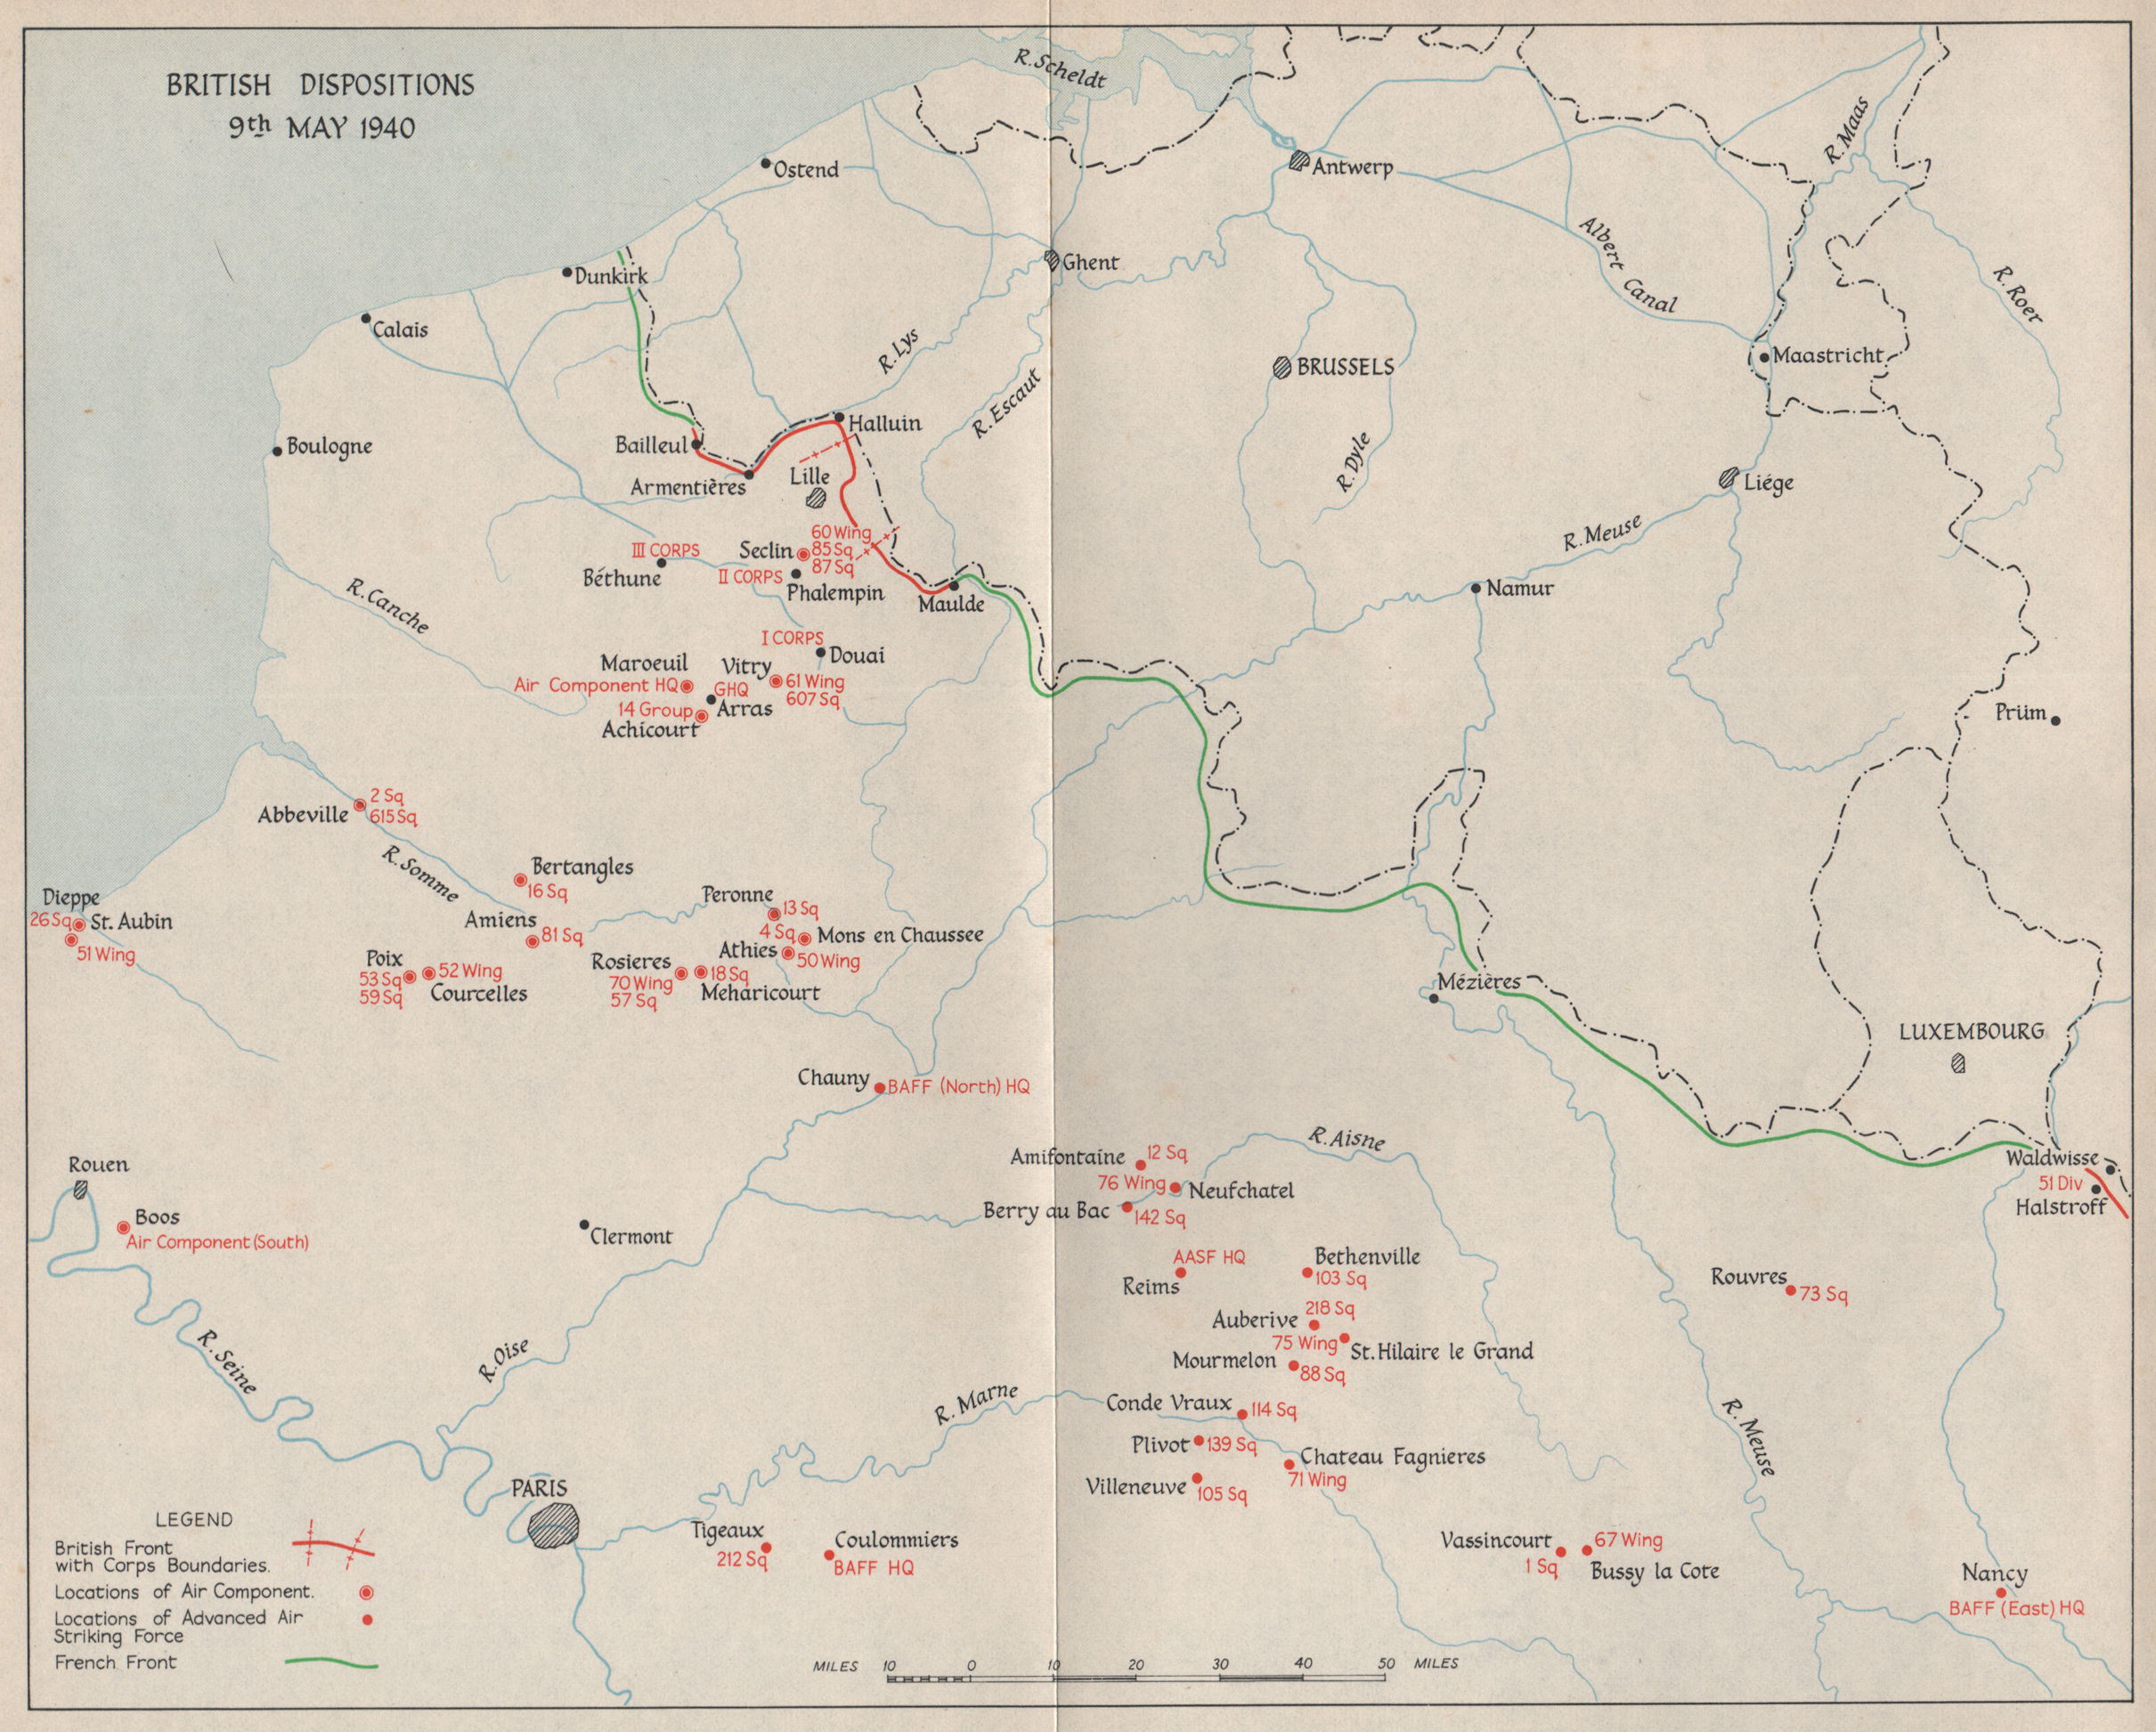 FALL OF FRANCE. British troop dispositions 9th May 1940. French front 1953 map